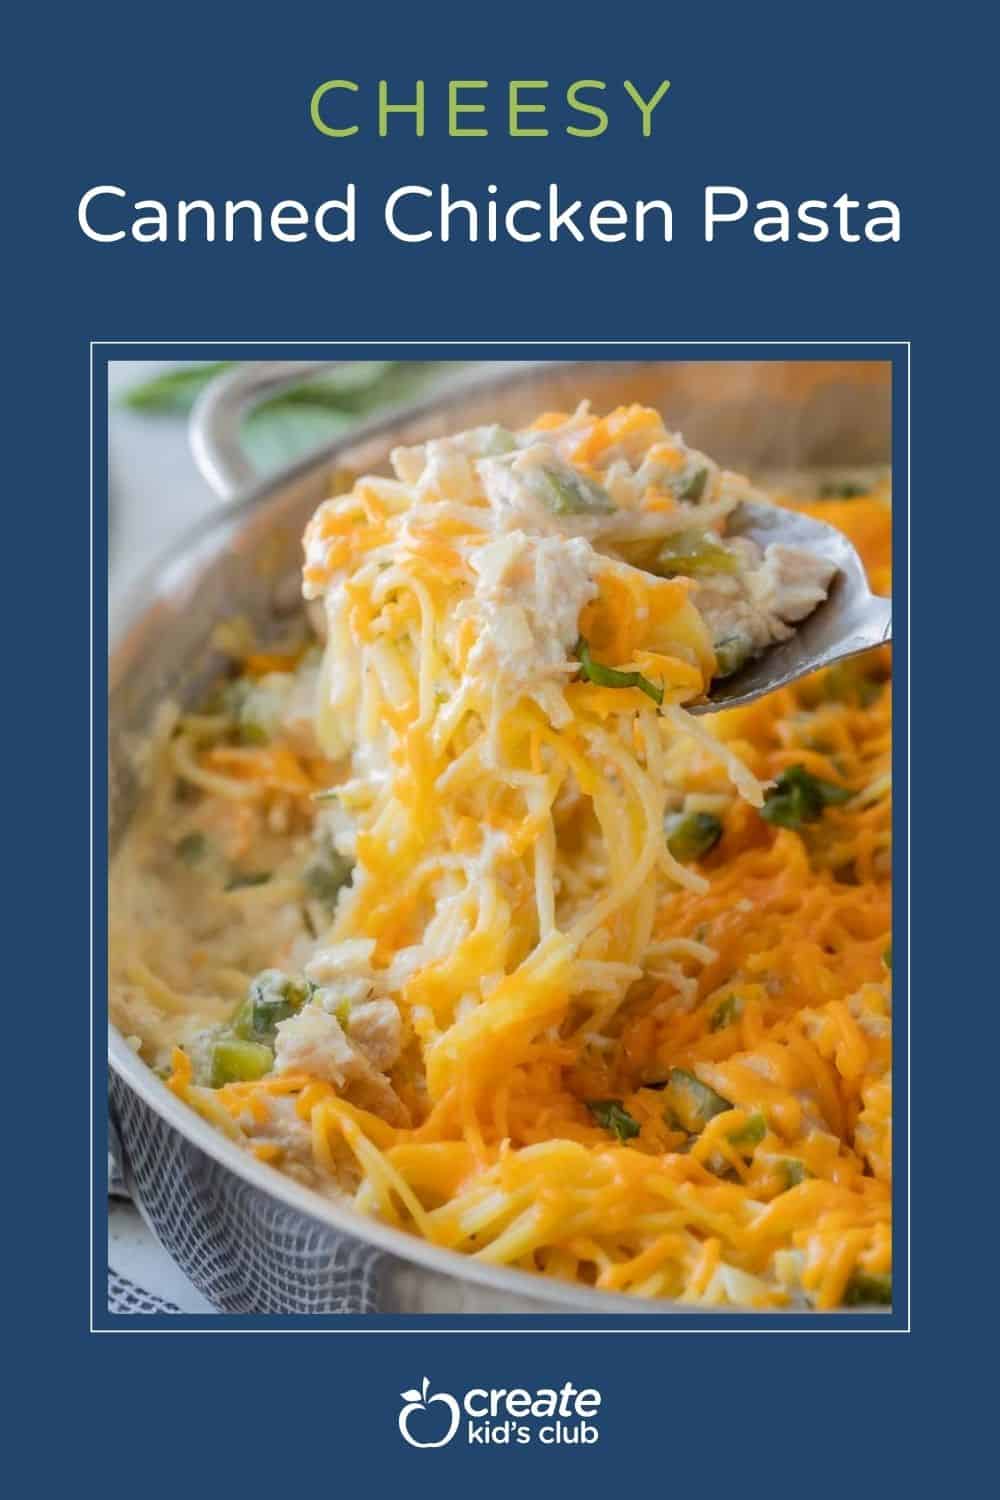 Pin of cheesy canned chicken pasta